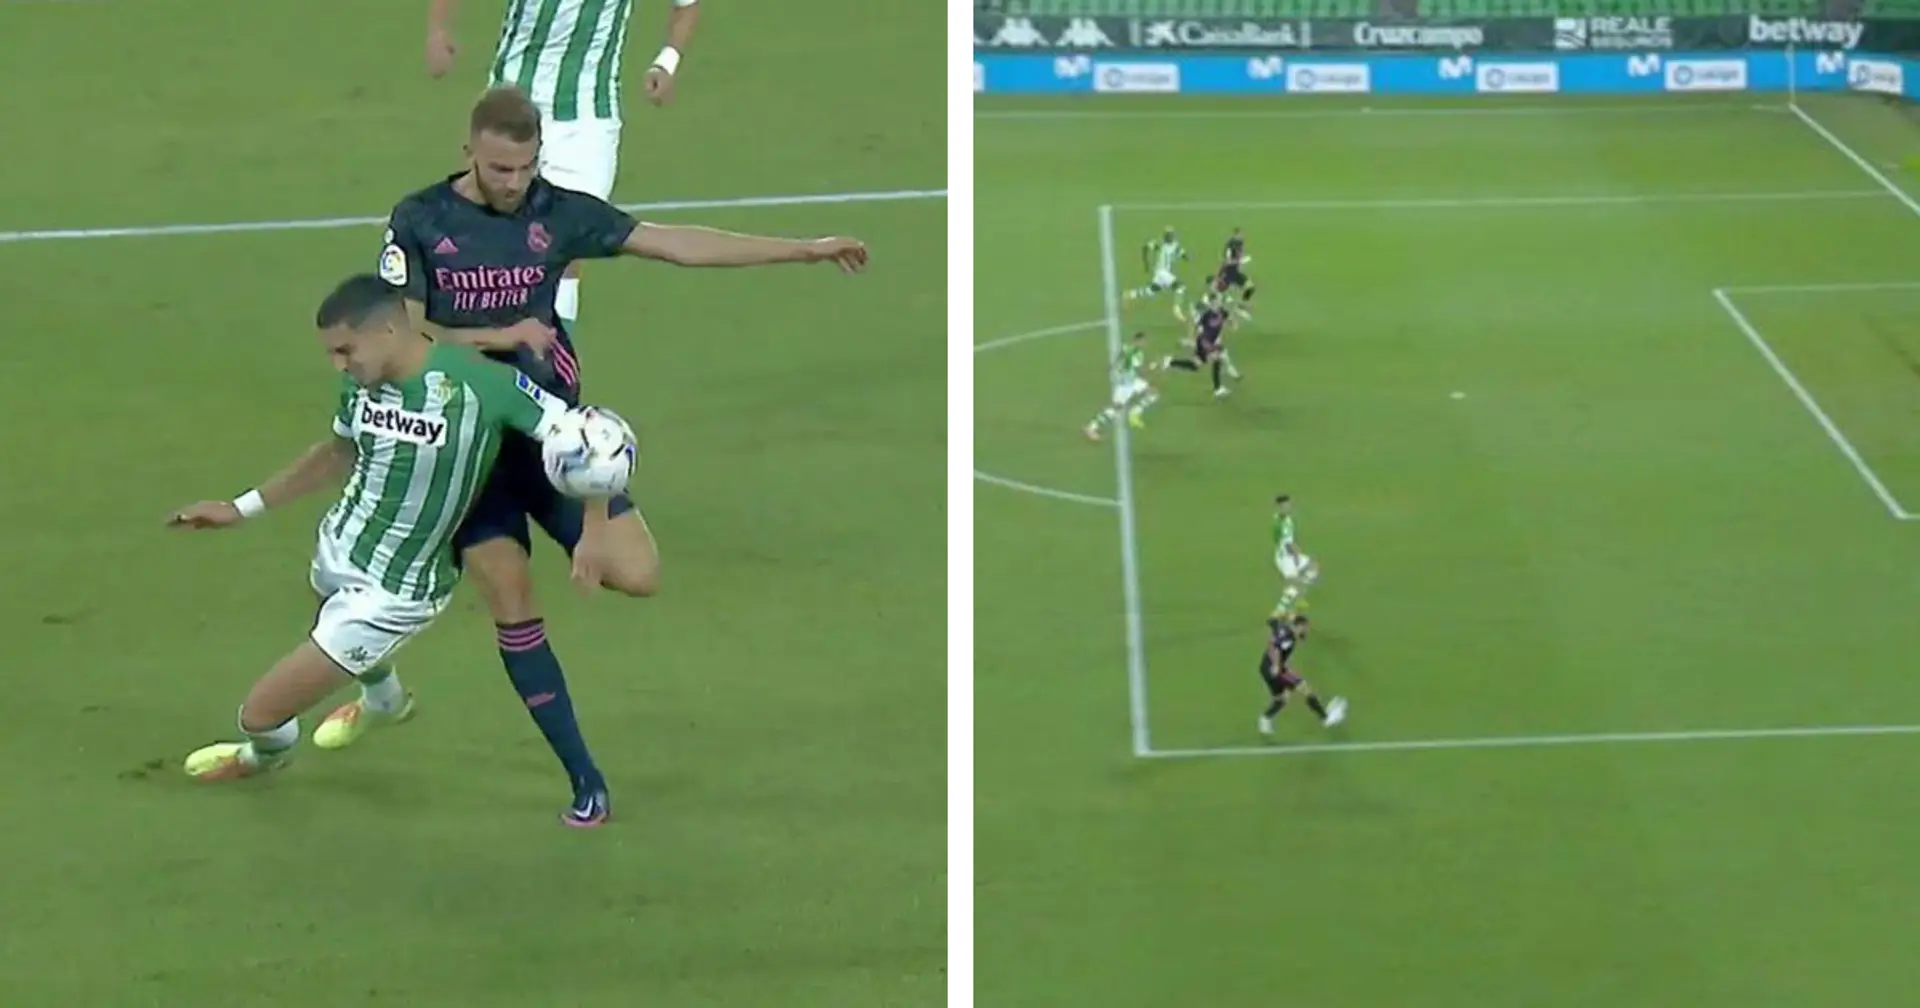 New season, same old La Liga refereeing: Real Madrid get first win of the season after several controversial calls